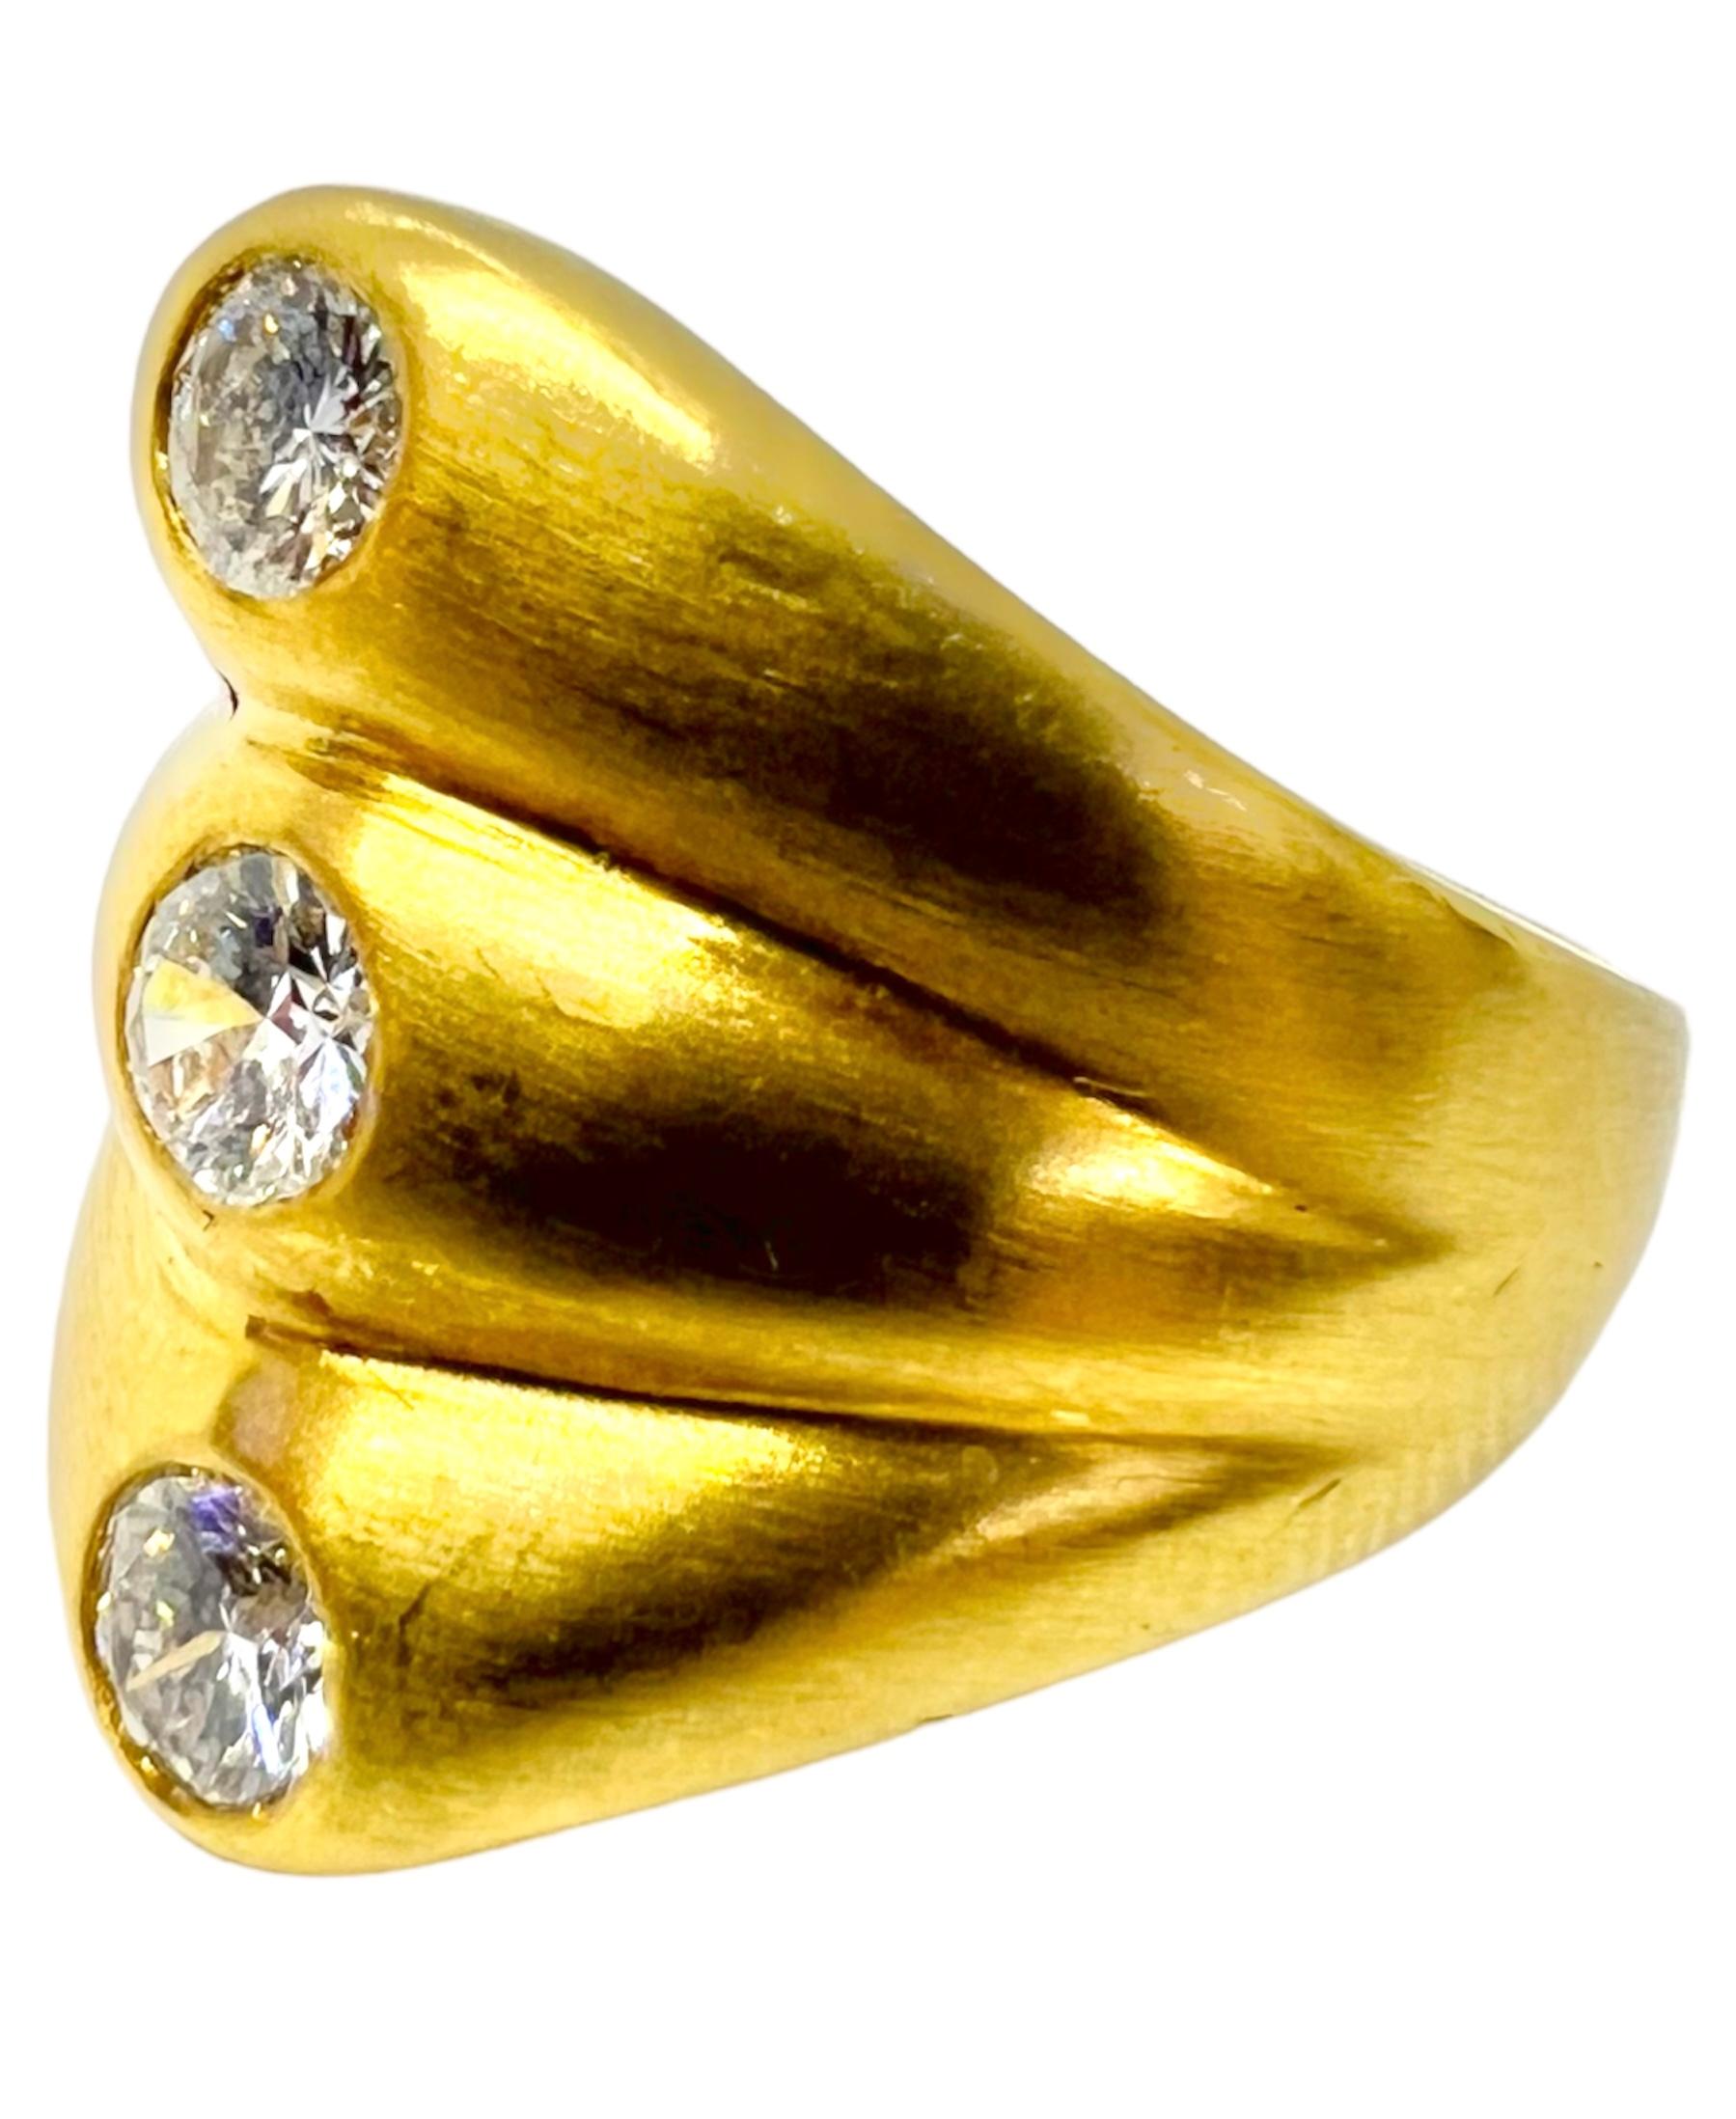 18K yellow gold ring with 3 round diamonds.

Sophia D by Joseph Dardashti LTD has been known worldwide for 35 years and are inspired by classic Art Deco design that merges with modern manufacturing techniques.  